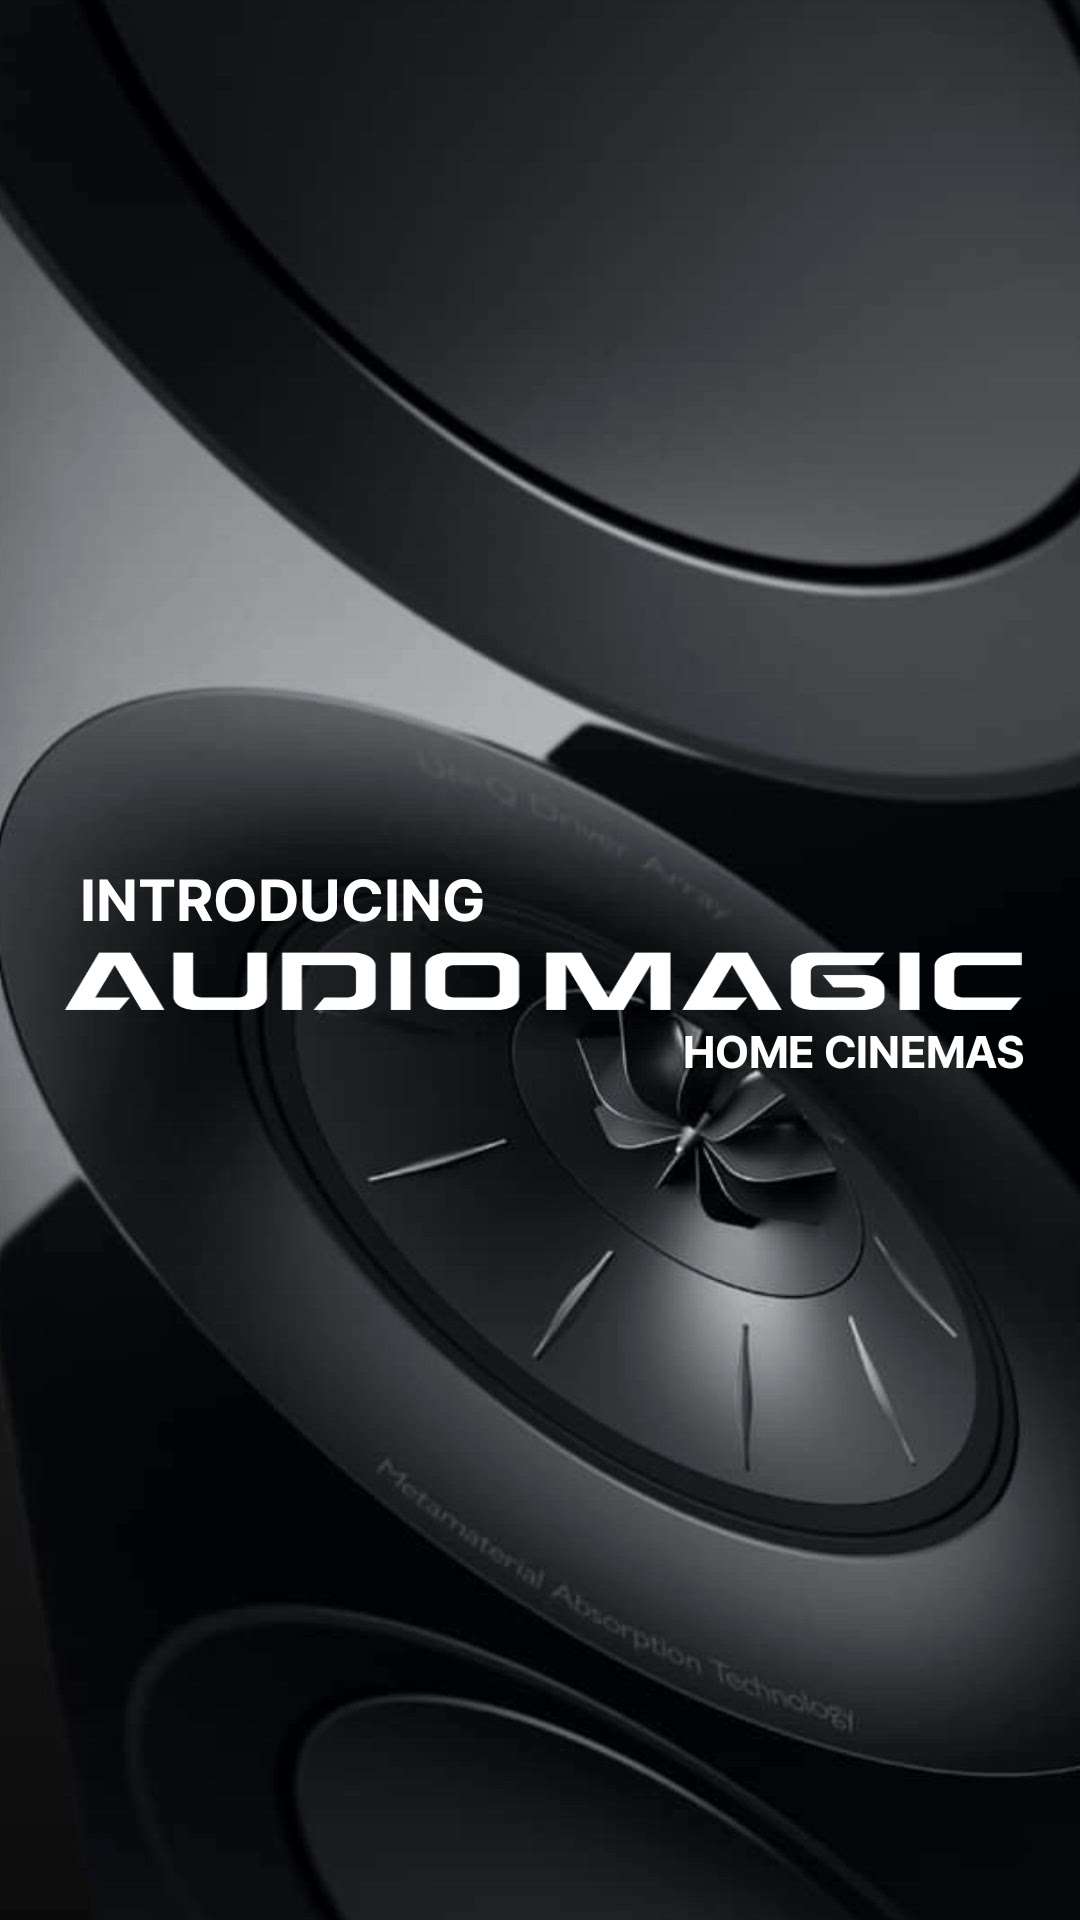 Hello and welcome to Audiomagic Home Cinemas!

We are thrilled to celebrate our 12th anniversary, and we owe it all to our incredible customers who have entrusted us to turn their home theater dreams into reality. In today's fast-paced world, home theater entertainment has become an integral part of our daily lives, and our dedicated team has spent years perfecting the art of creating professional, international home cinema experiences. With cutting-edge audio-visual equipment, the latest audio formats, and state-of-the-art visual projection systems, we promise to leave you stunned and excited like never before. Our acoustic team is here to craft iconic designs and color patterns that perfectly match your vision.

 #Hometheater  #music  #artist  #HouseConstruction  #home decor
 #LivingRoomCarpets  #new house  #projectorscreen  #recliners